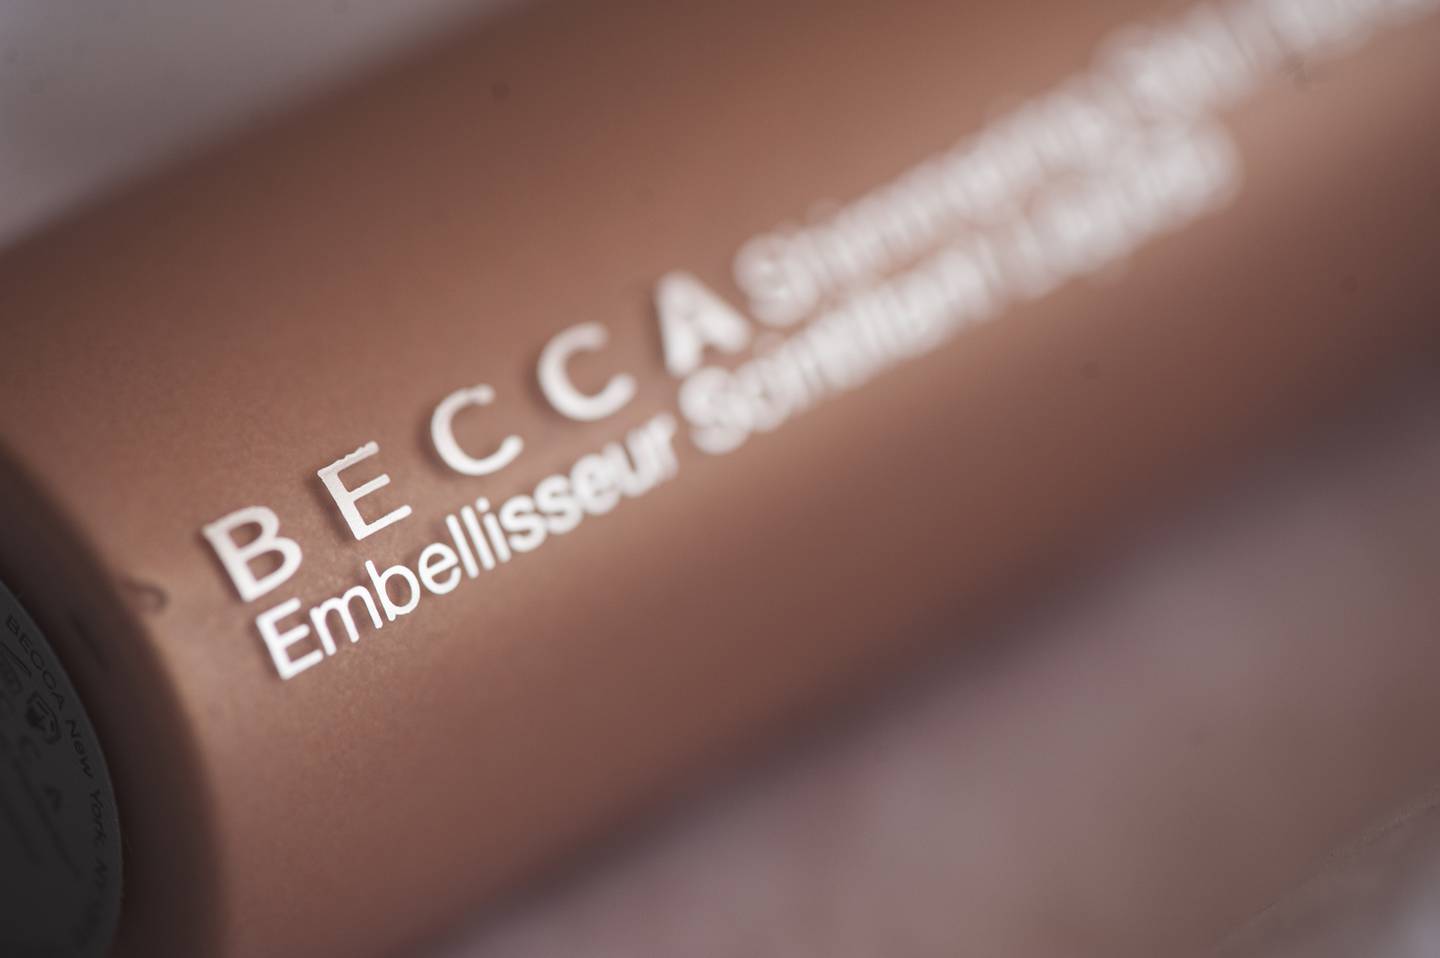 The Estée Lauder Companies have announced the closure of two brands, including Becca Cosmetics, this year